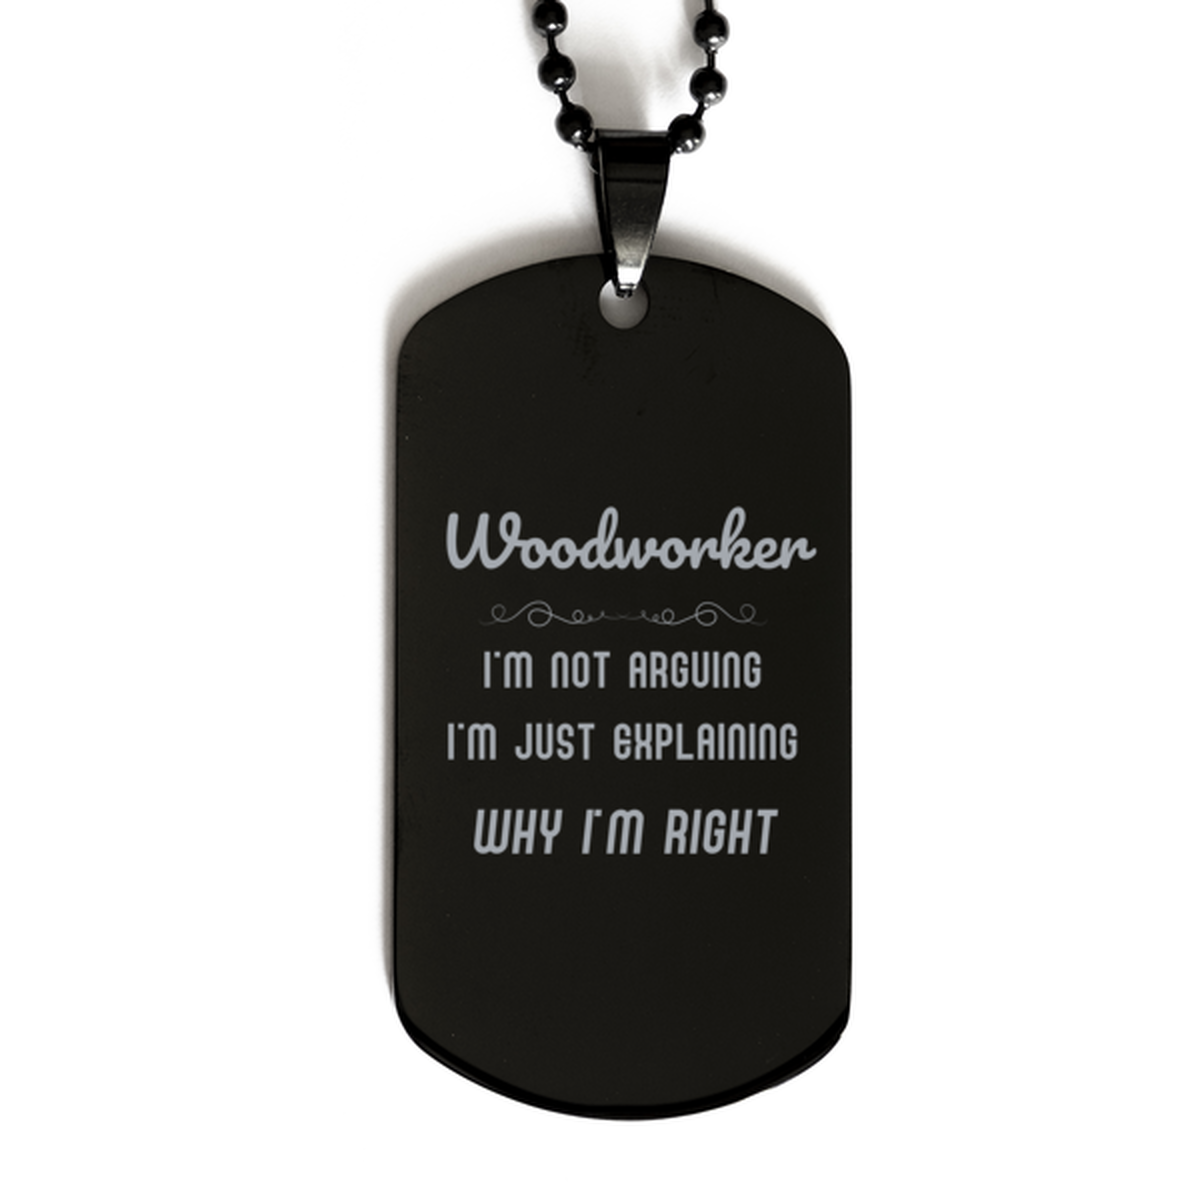 Woodworker I'm not Arguing. I'm Just Explaining Why I'm RIGHT Black Dog Tag, Funny Saying Quote Woodworker Gifts For Woodworker Graduation Birthday Christmas Gifts for Men Women Coworker